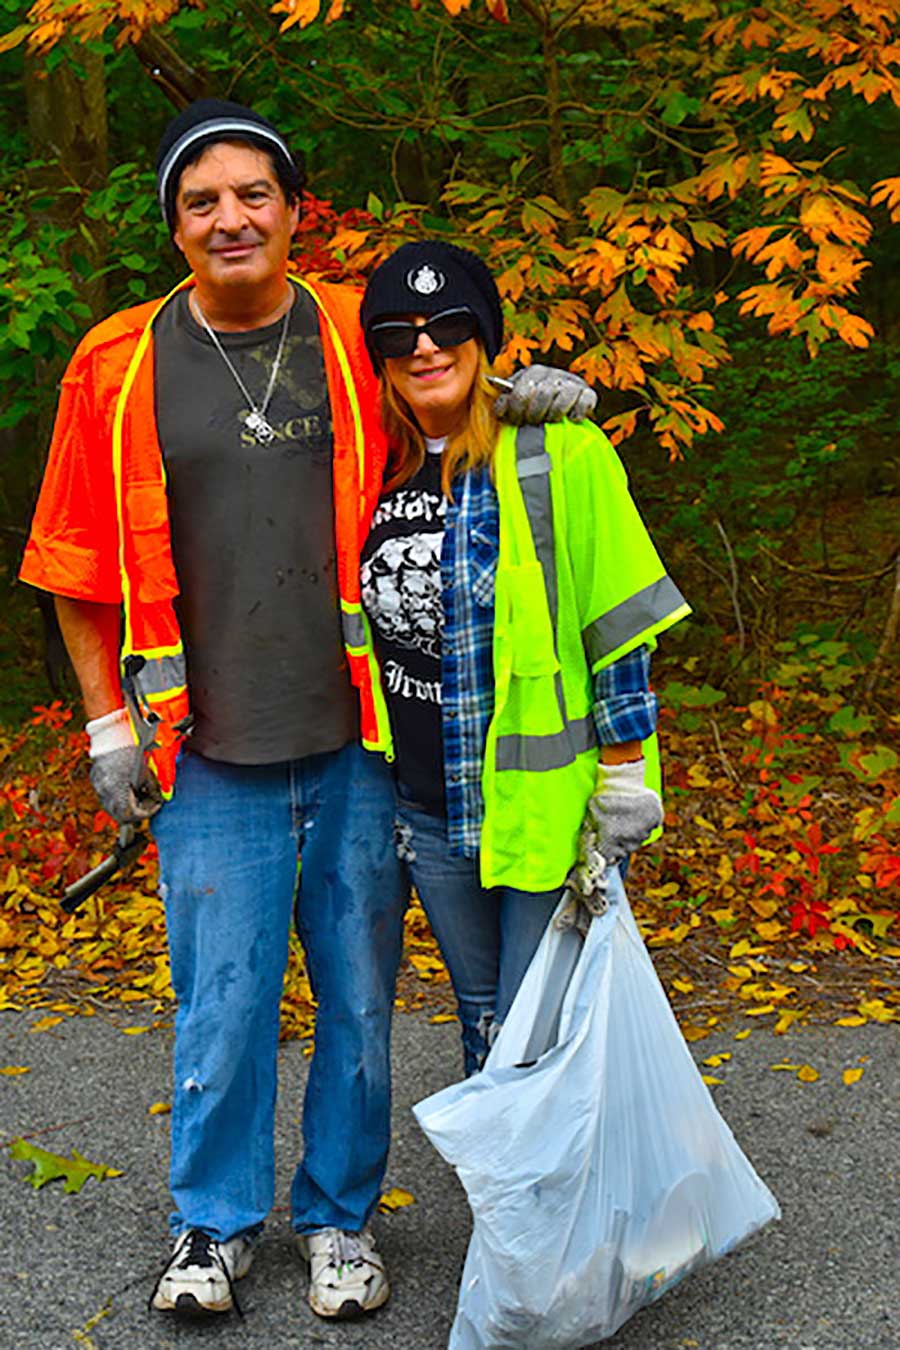 photos from Old Bridge Militia Foundation Community Clean up 2016